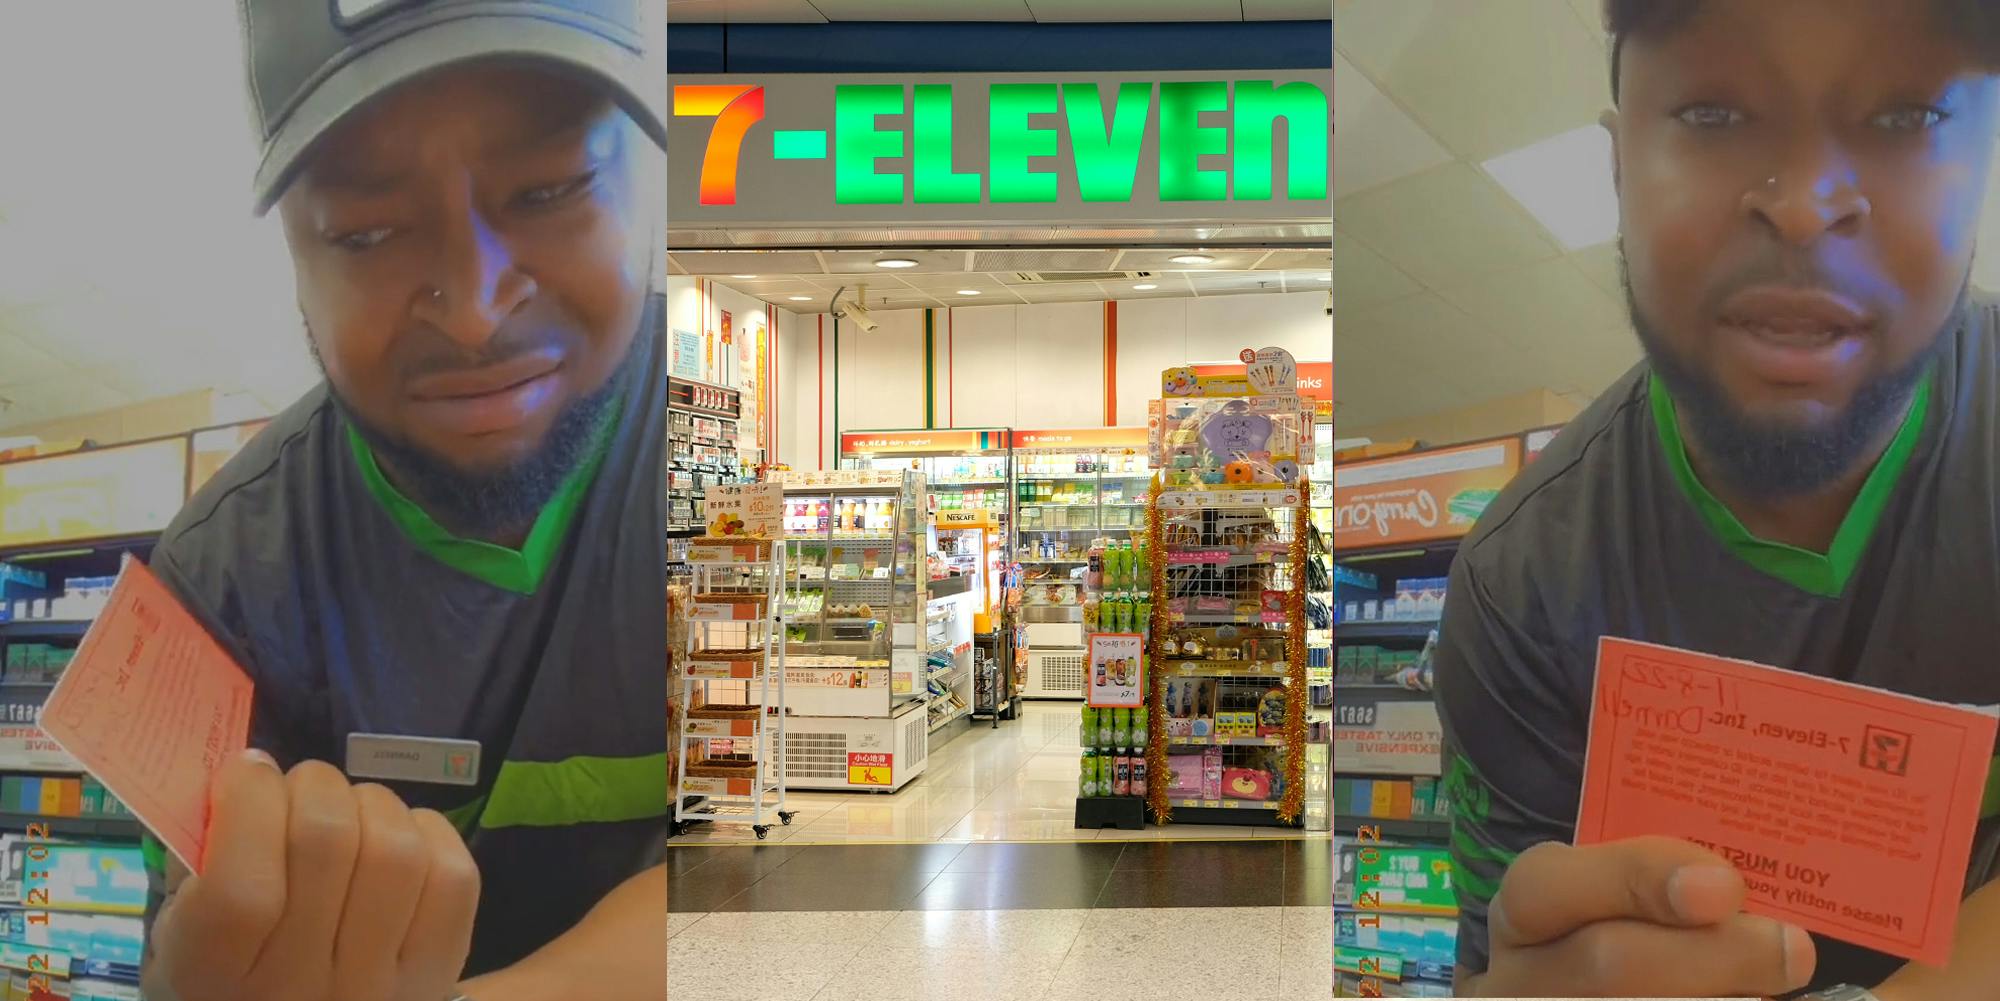 7/11 employee holding red card at 7/11 store (l) 7/11 store with sign (c) 7/11 employee holding red card at 7/11 store (r)